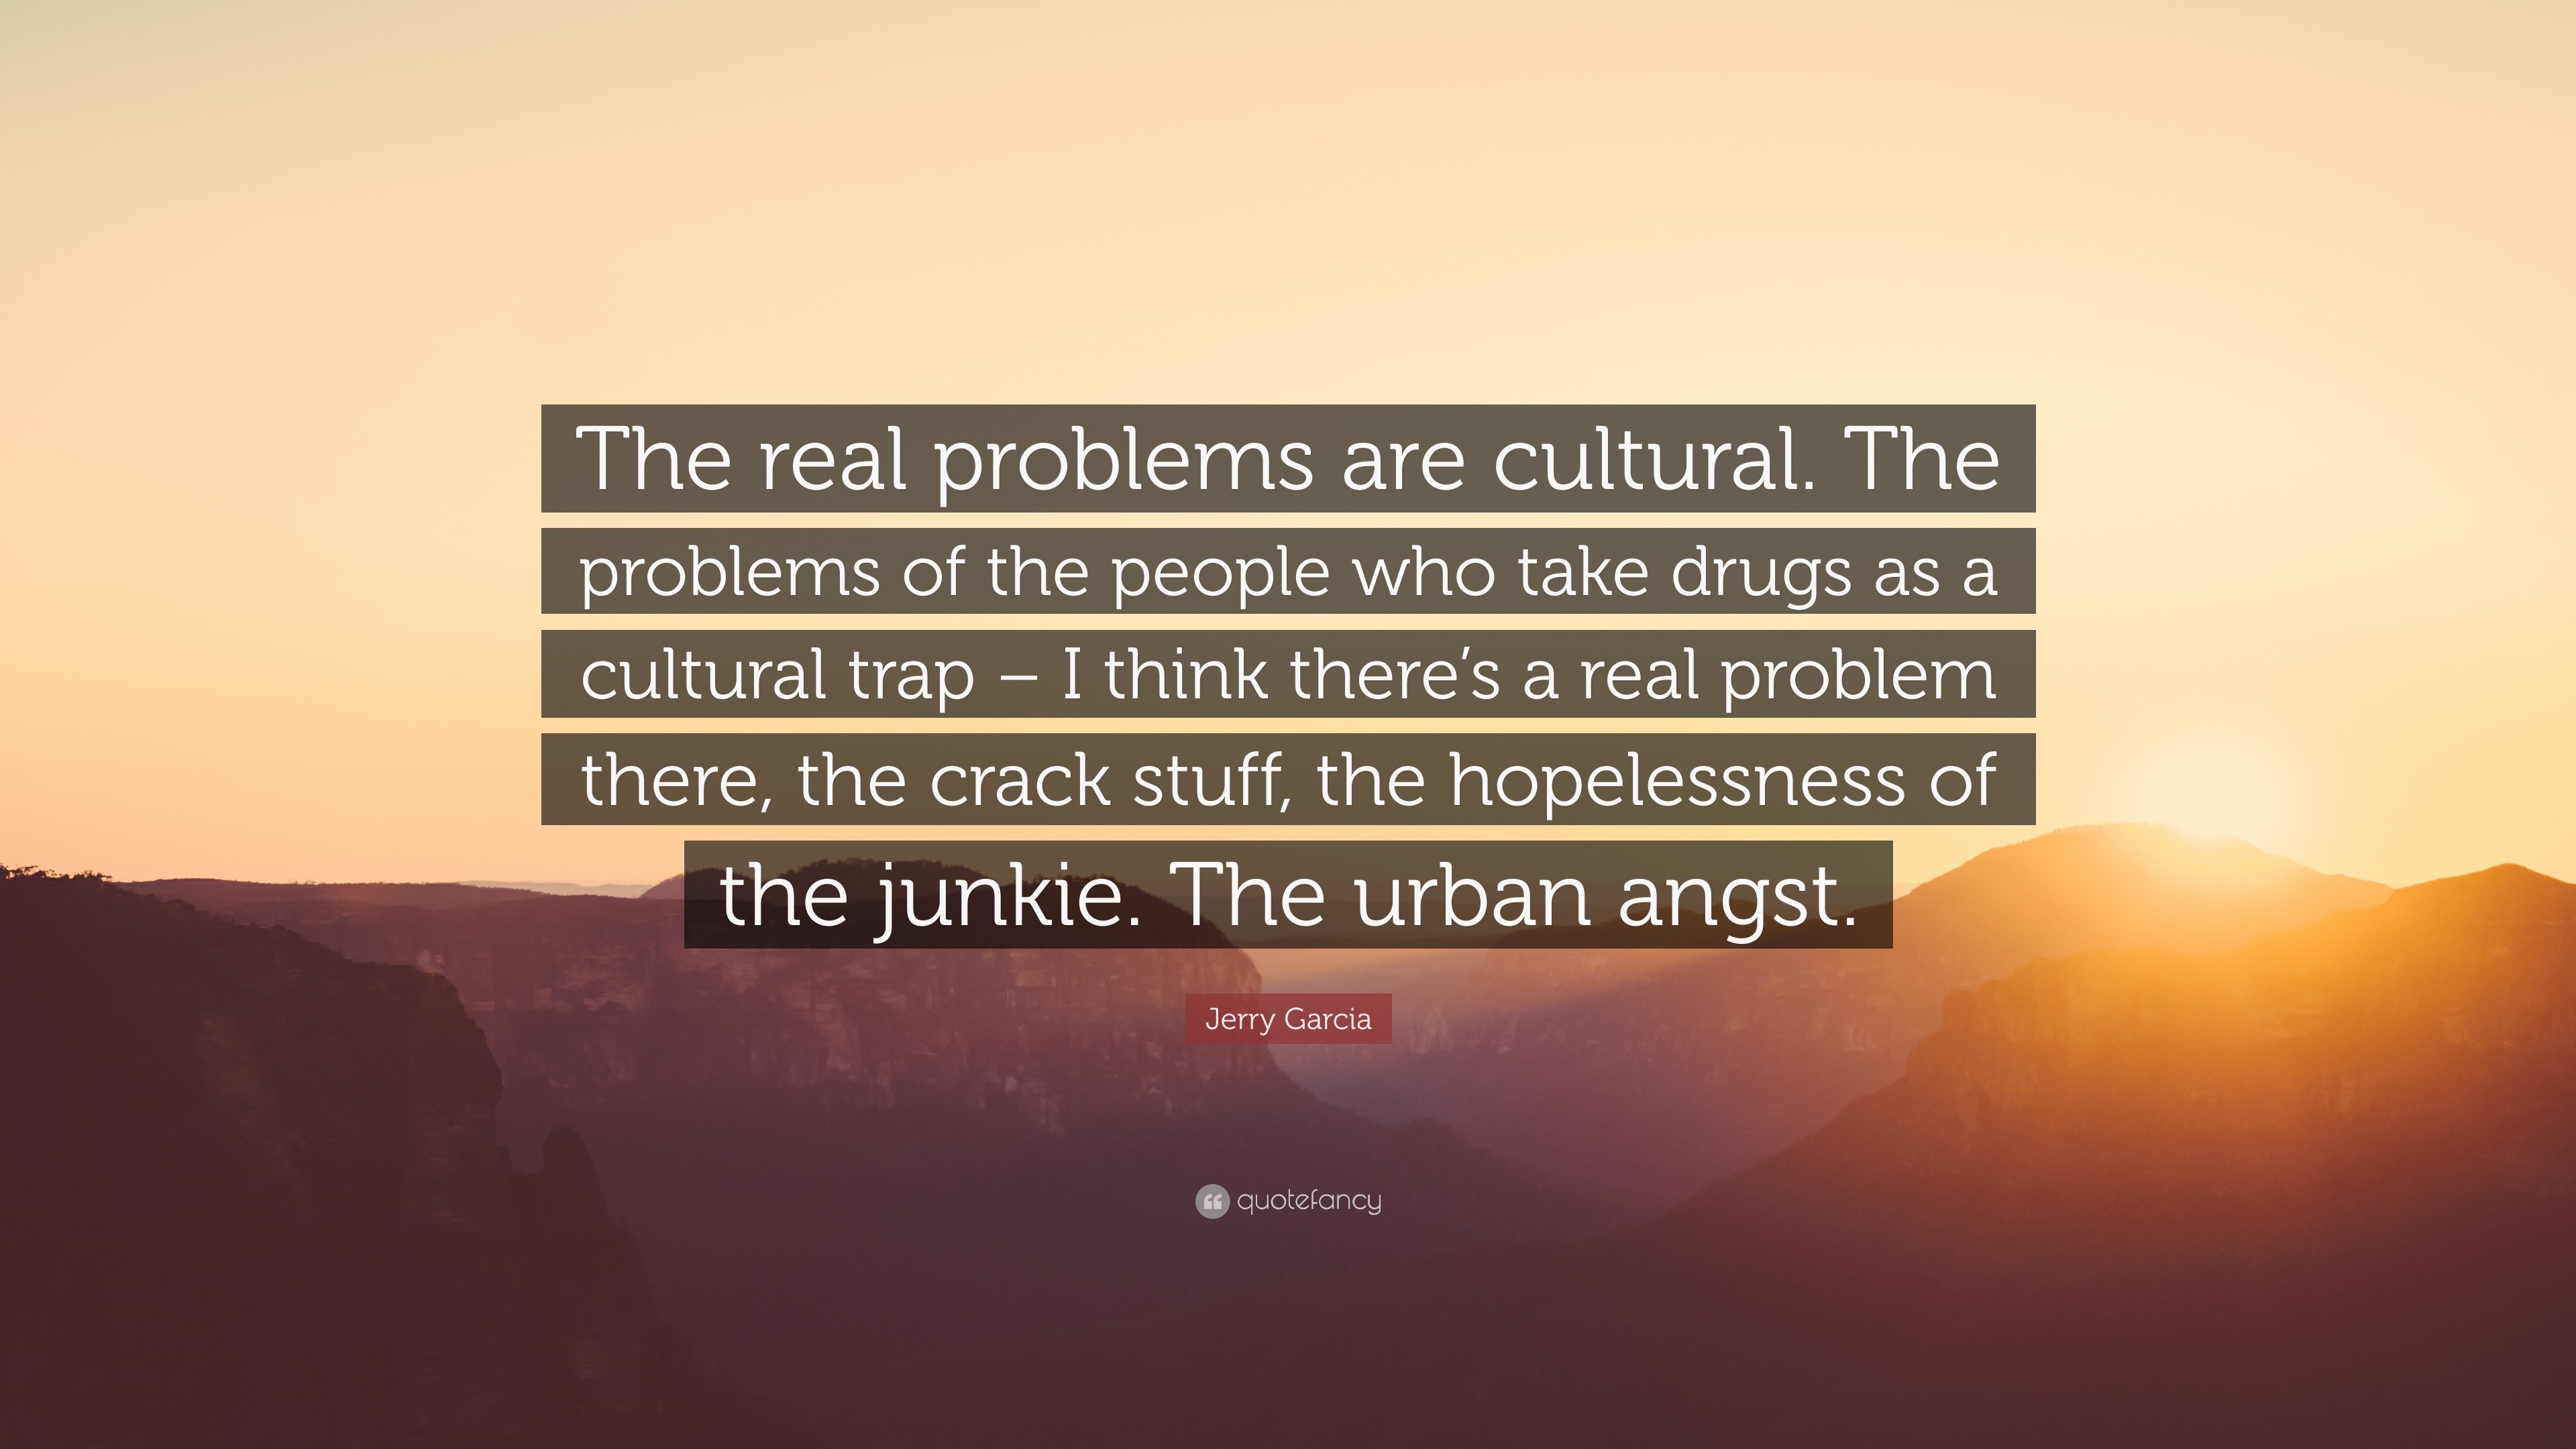 Jerry Garcia Quote: “The real problems are cultural. The problems